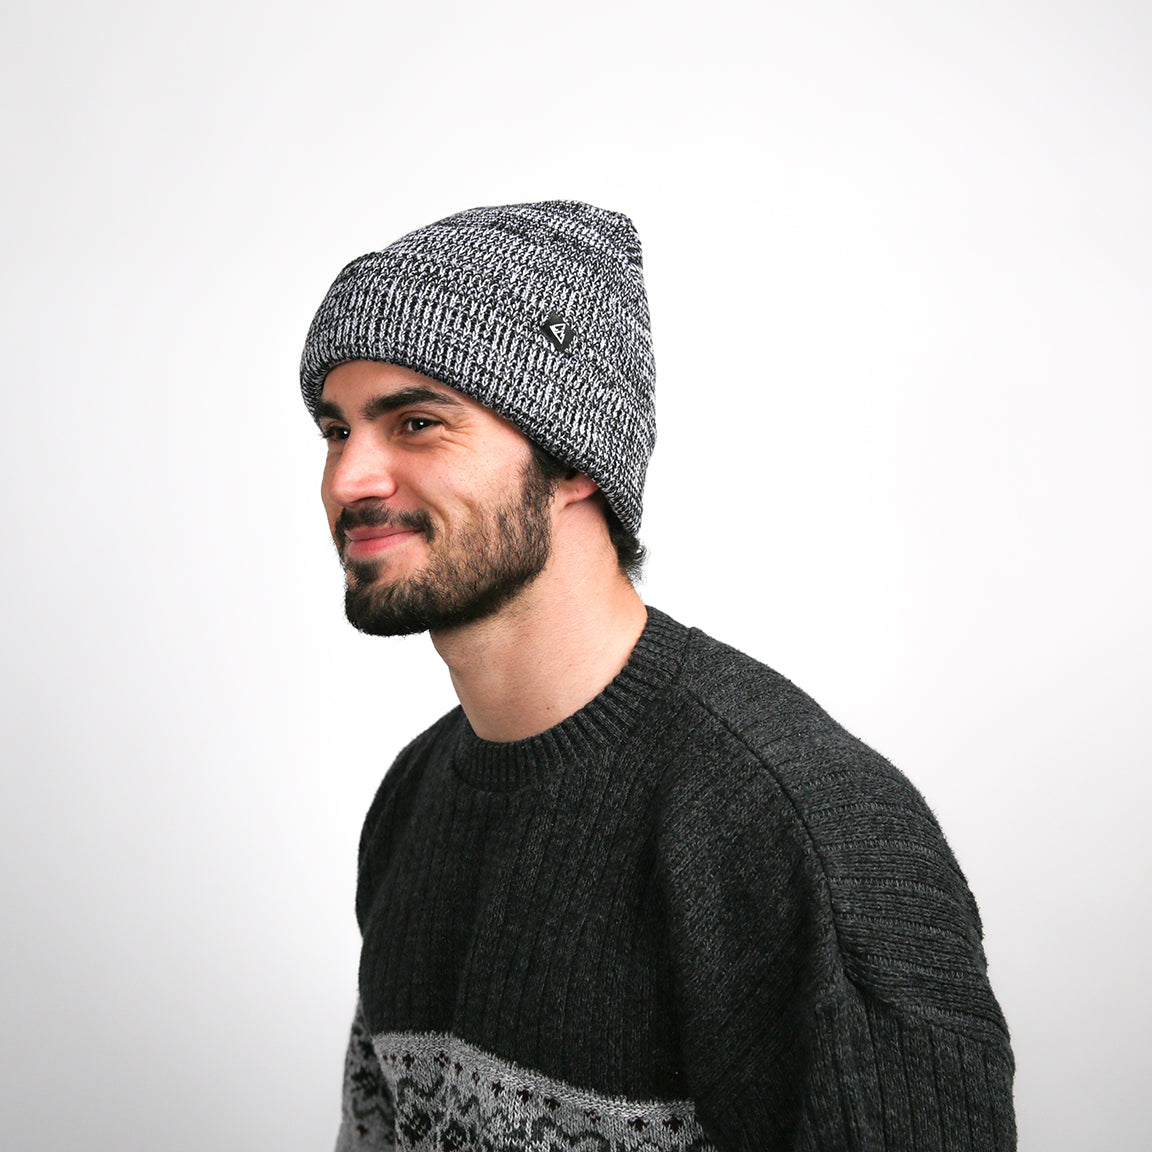 The wearer is seen smiling, with the grey knit beanie styled to sit back on the head, enhancing the casual, comfortable vibe of the accessory.